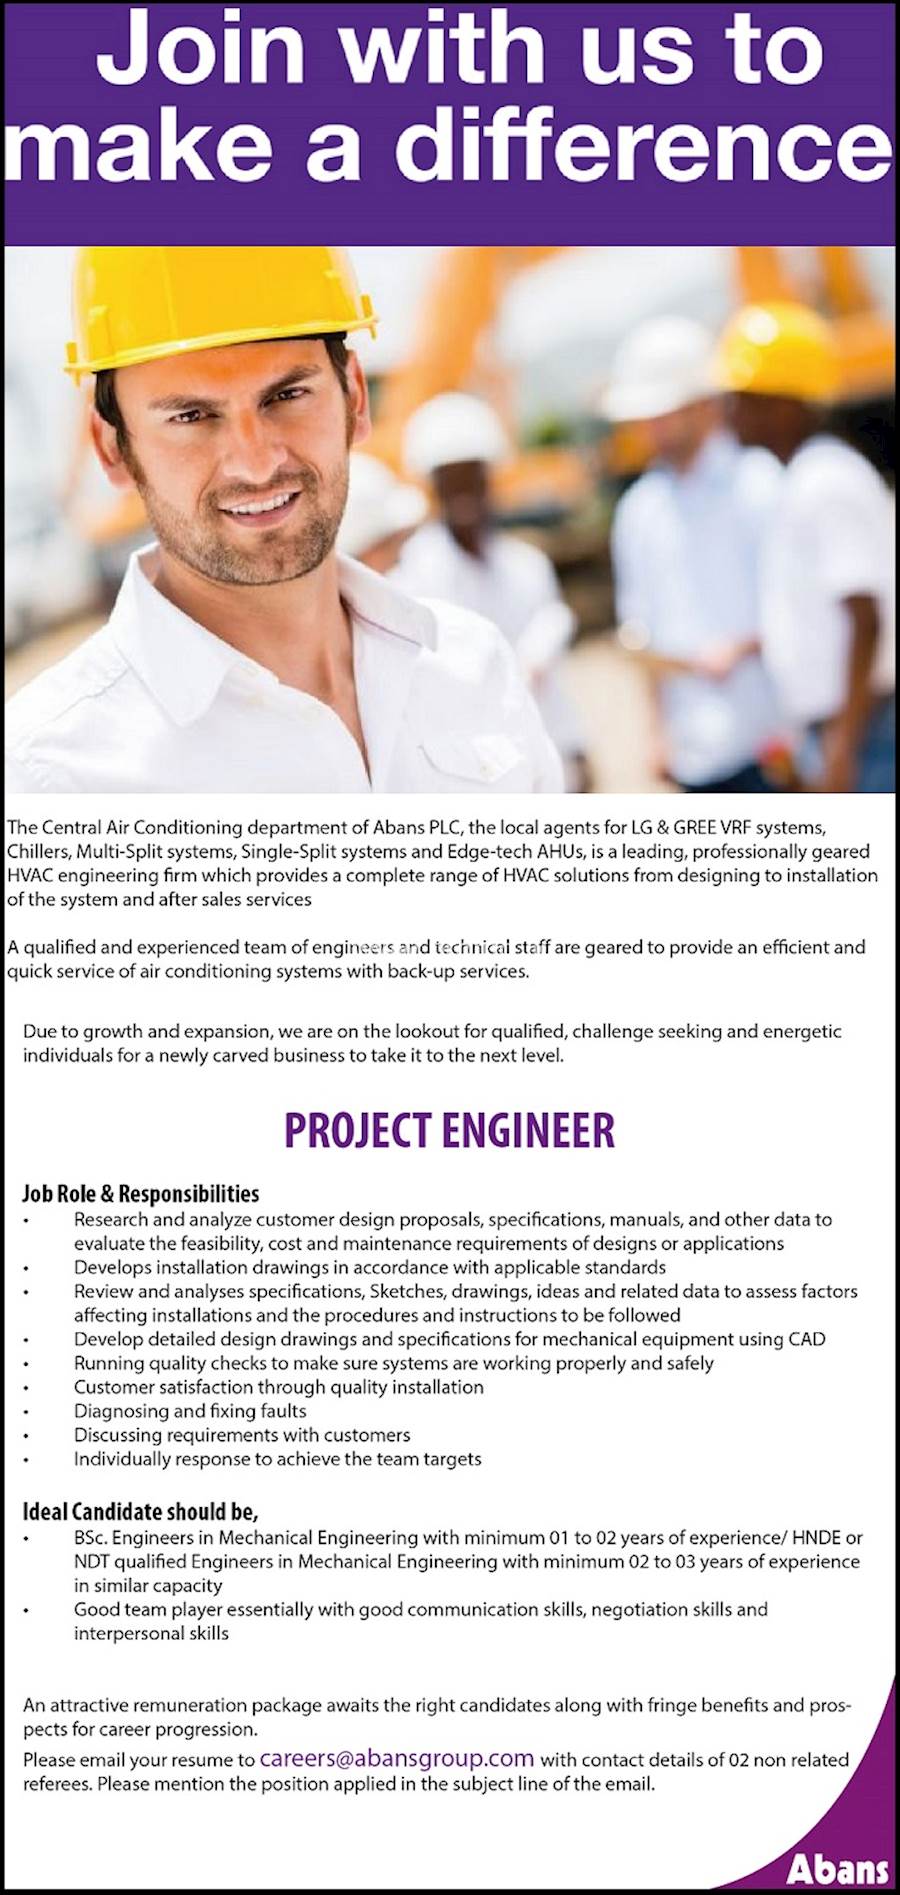 Project Engineer at Abans